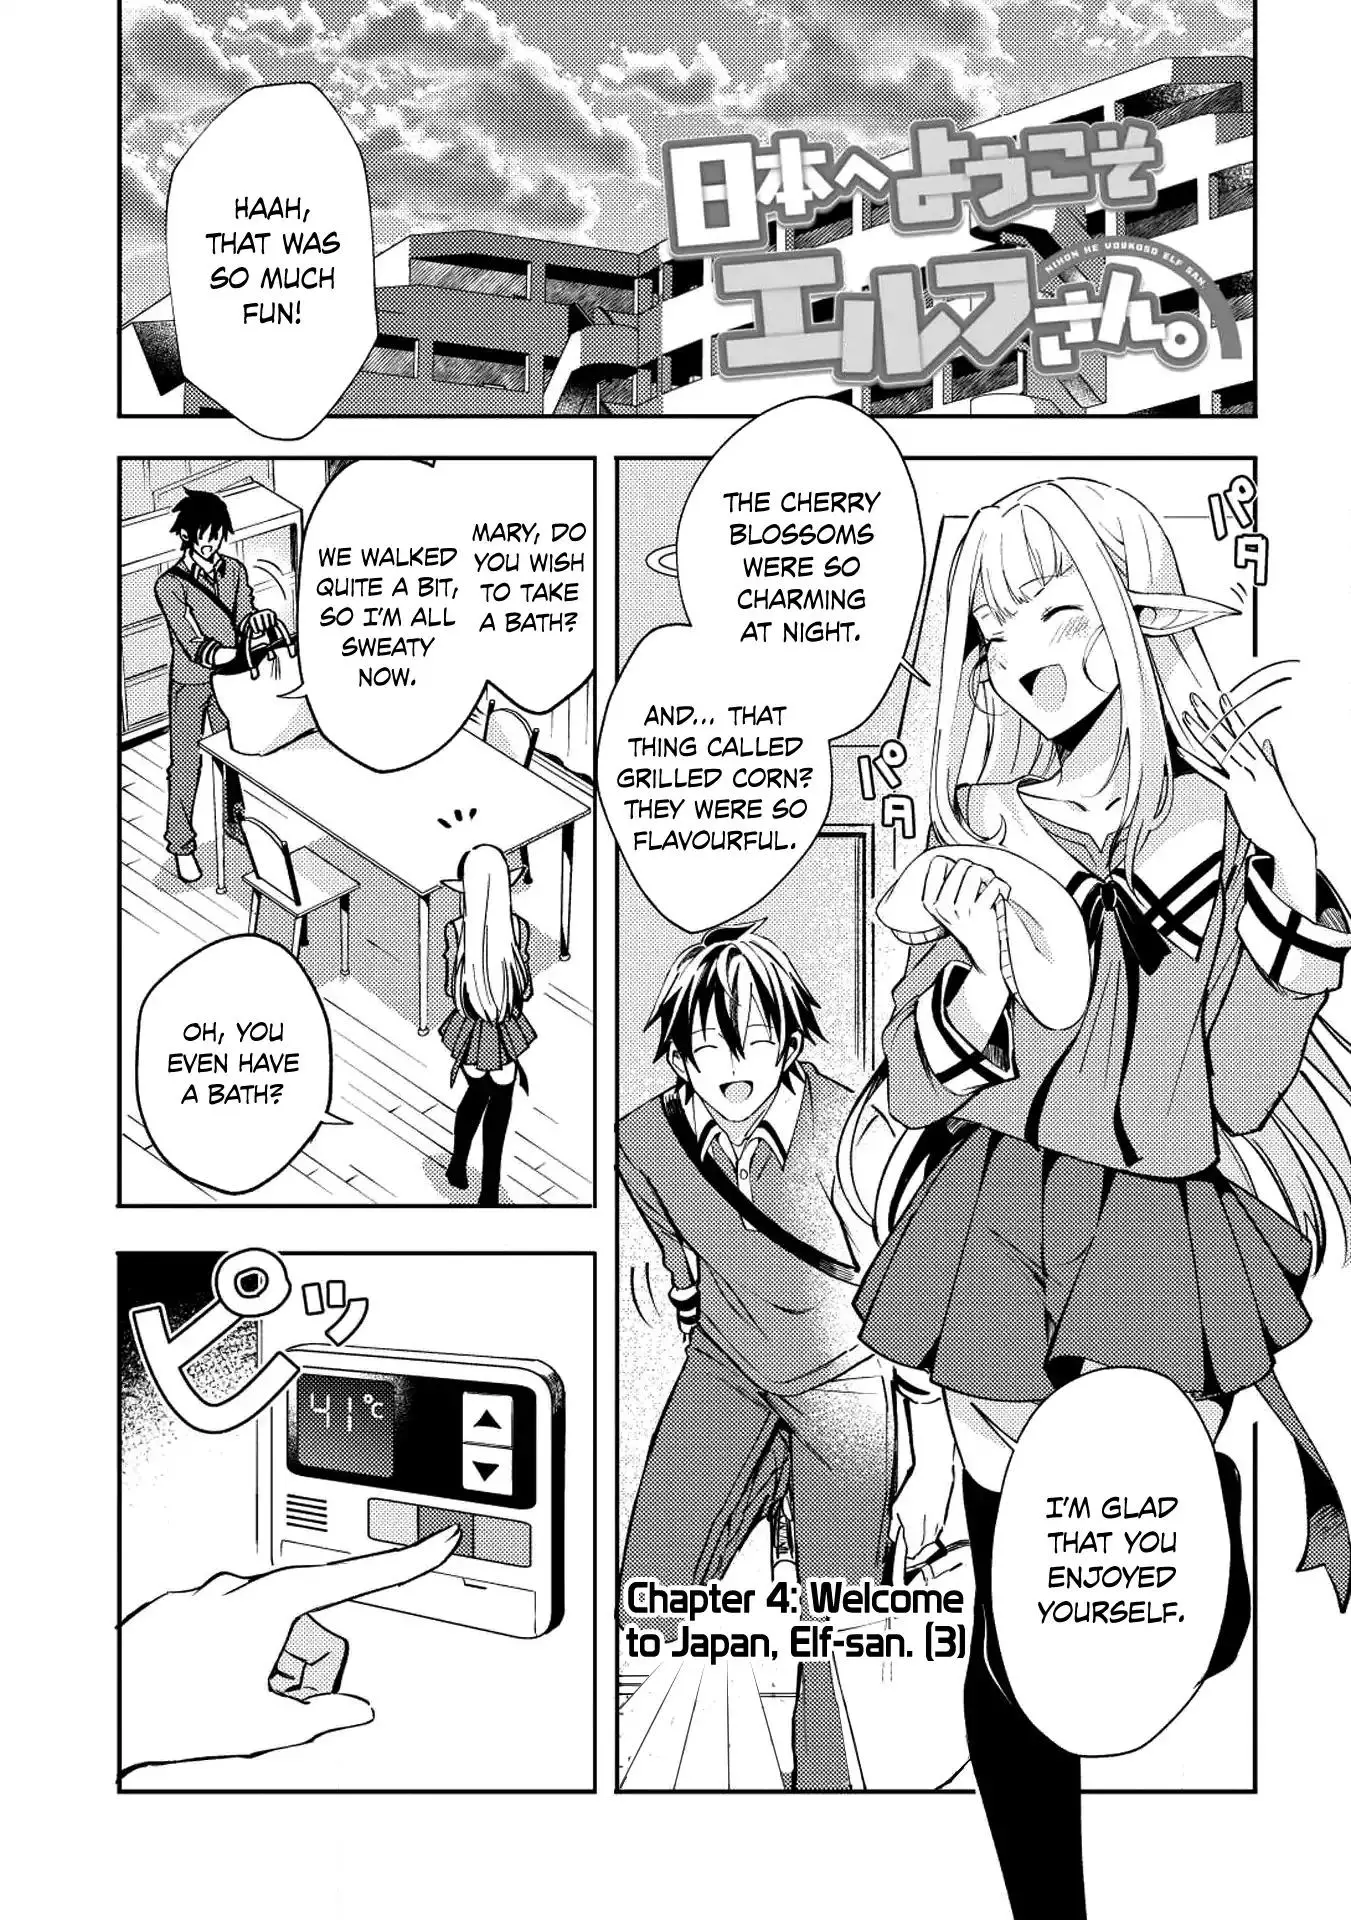 Welcome to Japan, Elf-san. - 4 page 1